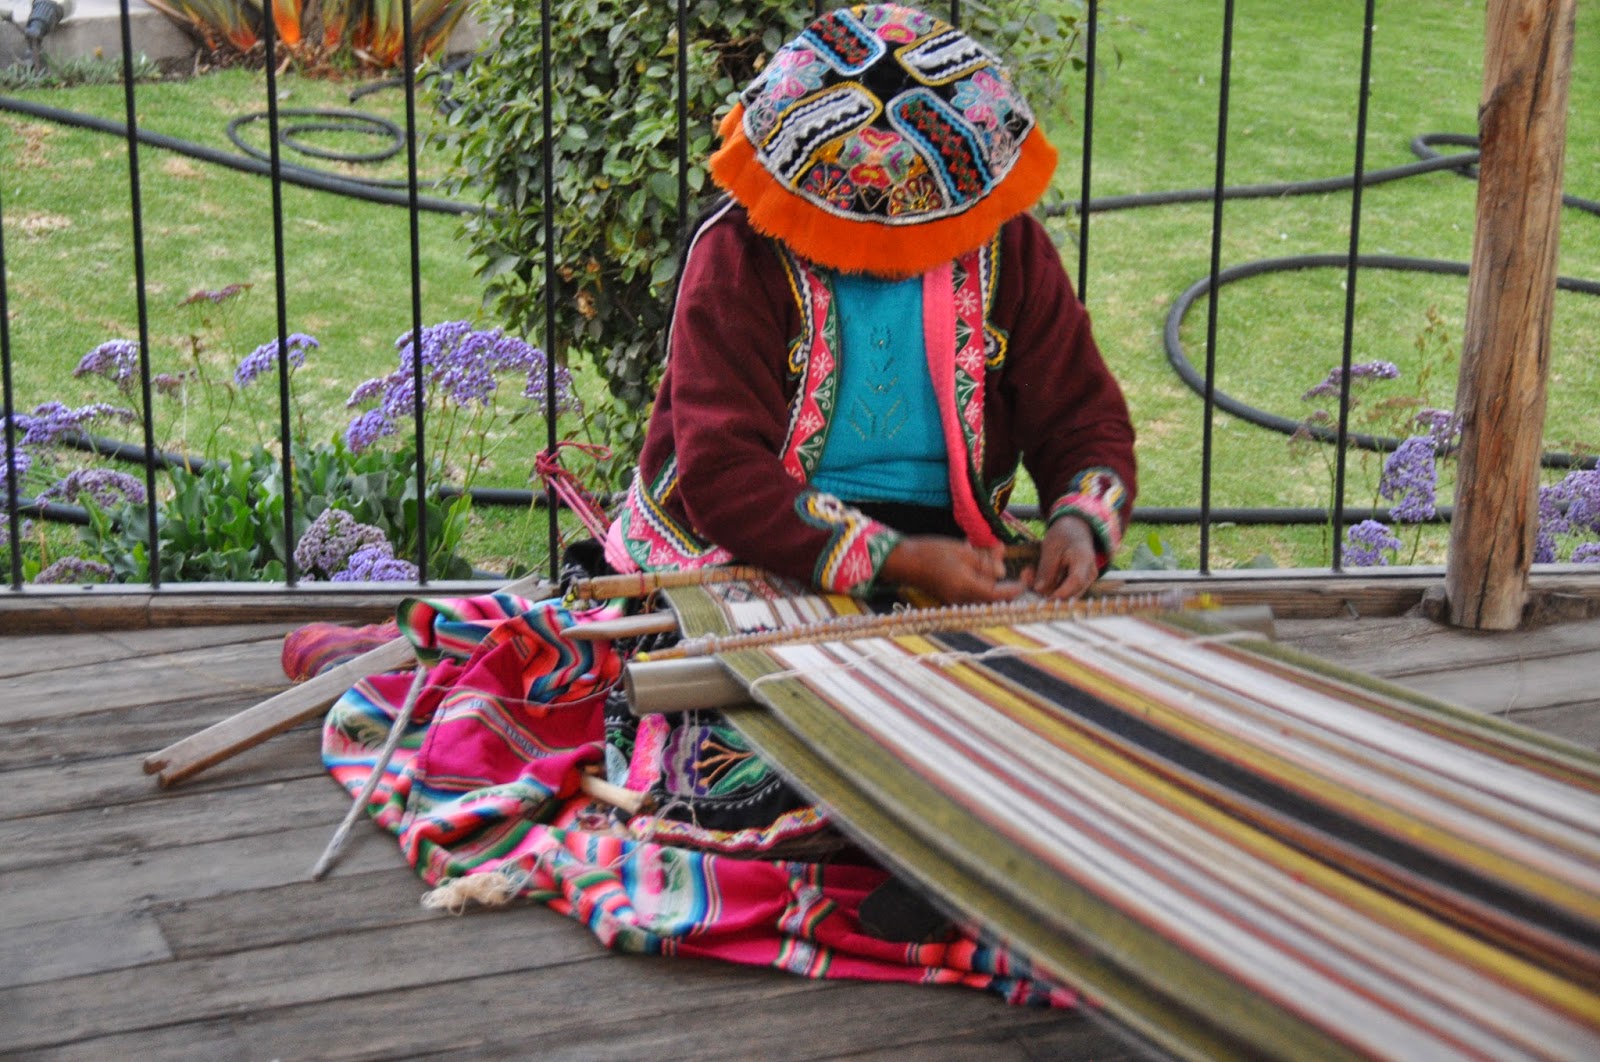 This woman is demonstrating the traditional style of Peruvian weaving.